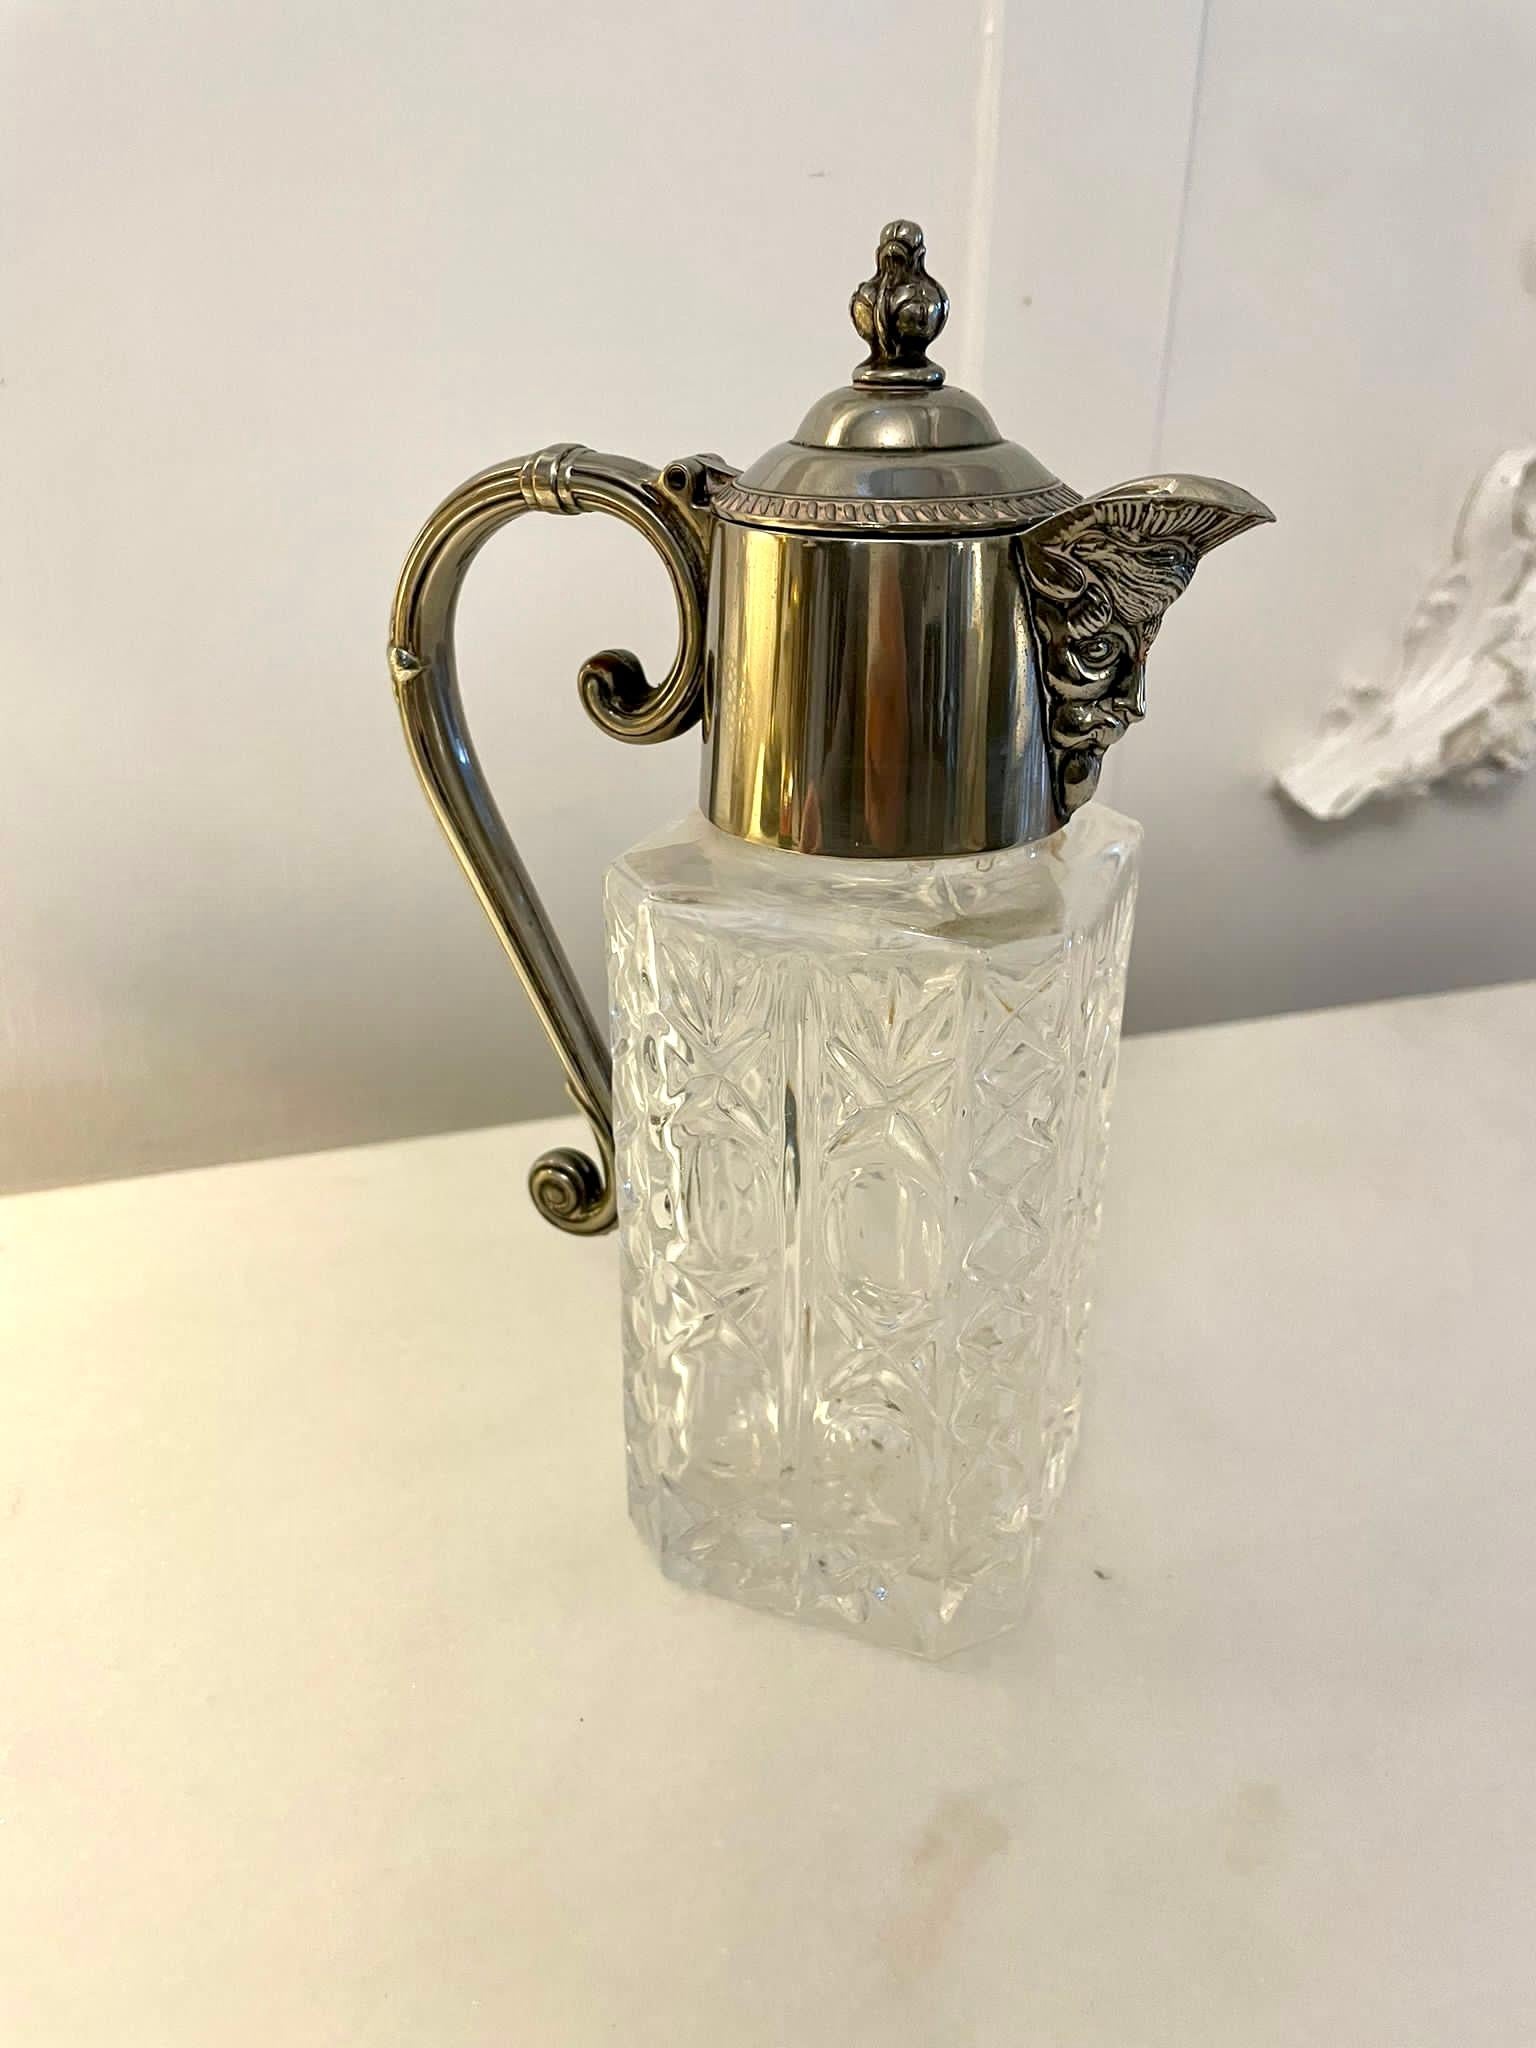 Unusual square antique Edwardian quality claret jug having a quality antique claret jug with a silver plated top and a square cut glass jug

An attractive example in lovely original condition


H 20.5 x W 7 x D 14cm
Date 1900.
 